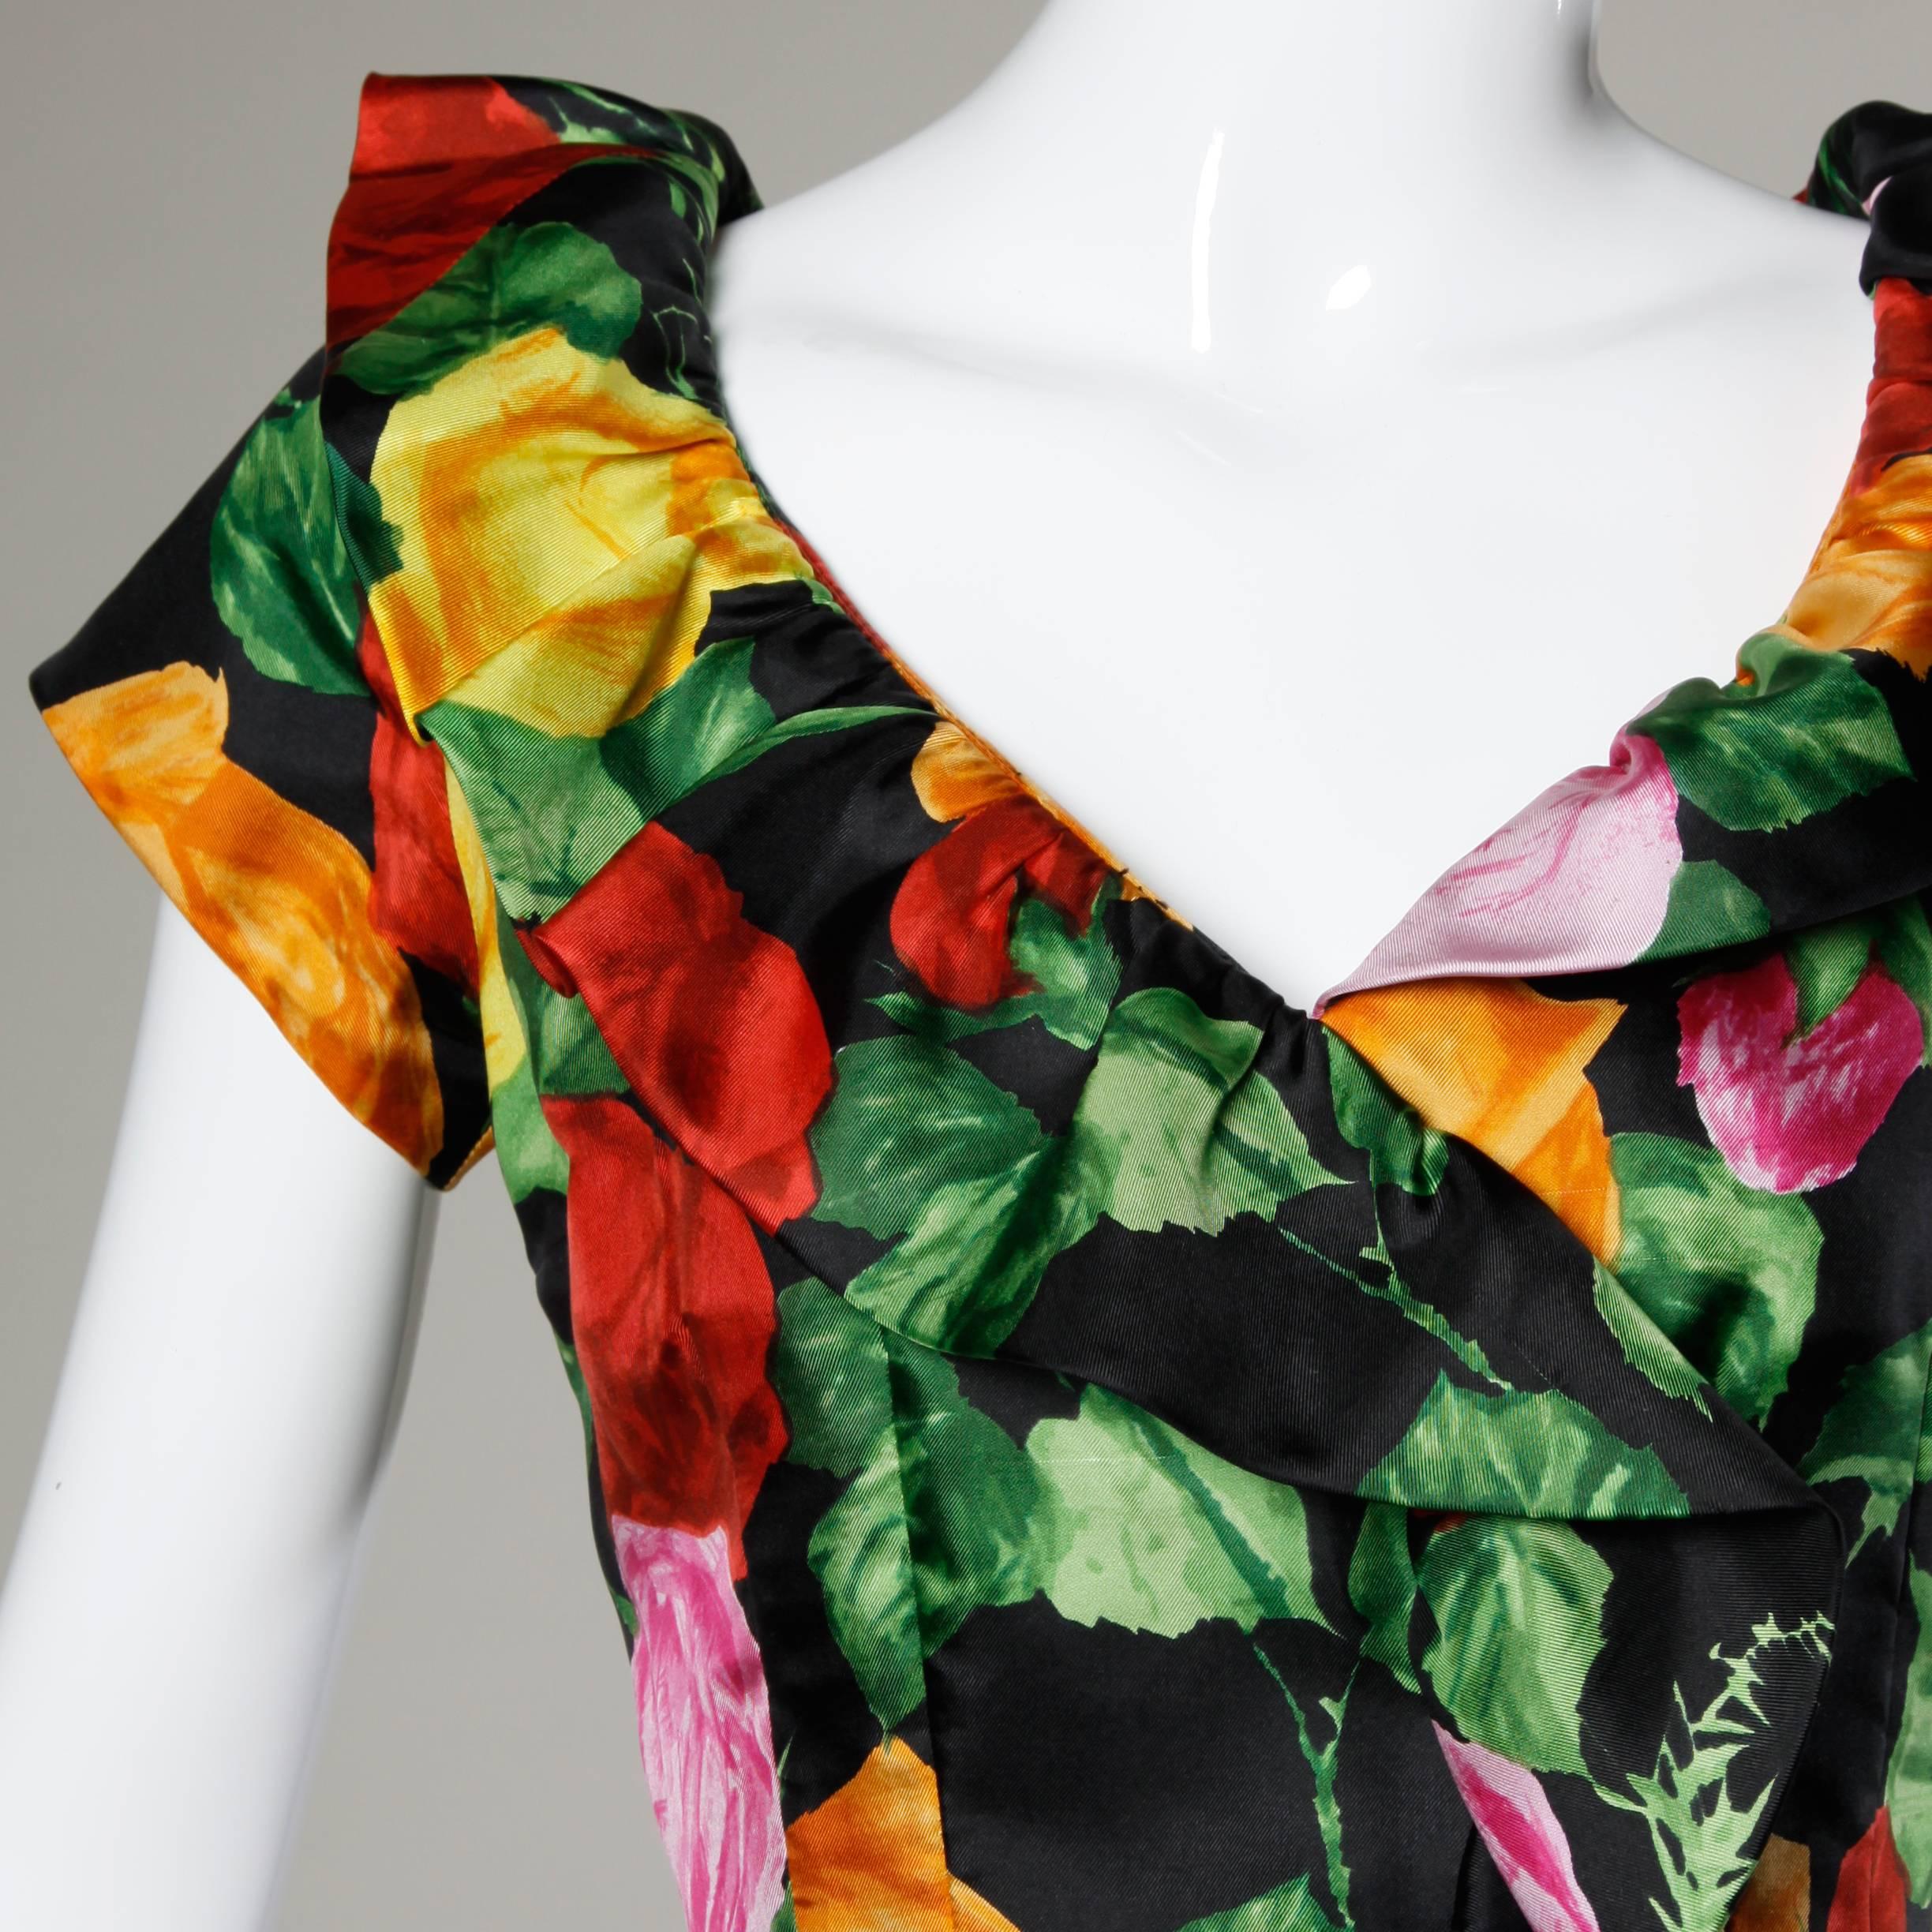 Gorgeous silk fabric! Vintage 1960s cocktail dress with a vibrant floral print and front ruffle detail.

Details:

Fully Lined
Back Zip and Hook Closure
Estimated Size: Small
Color: Black/ Green/ Red/ Orange 
Fabric: Silk
Label: